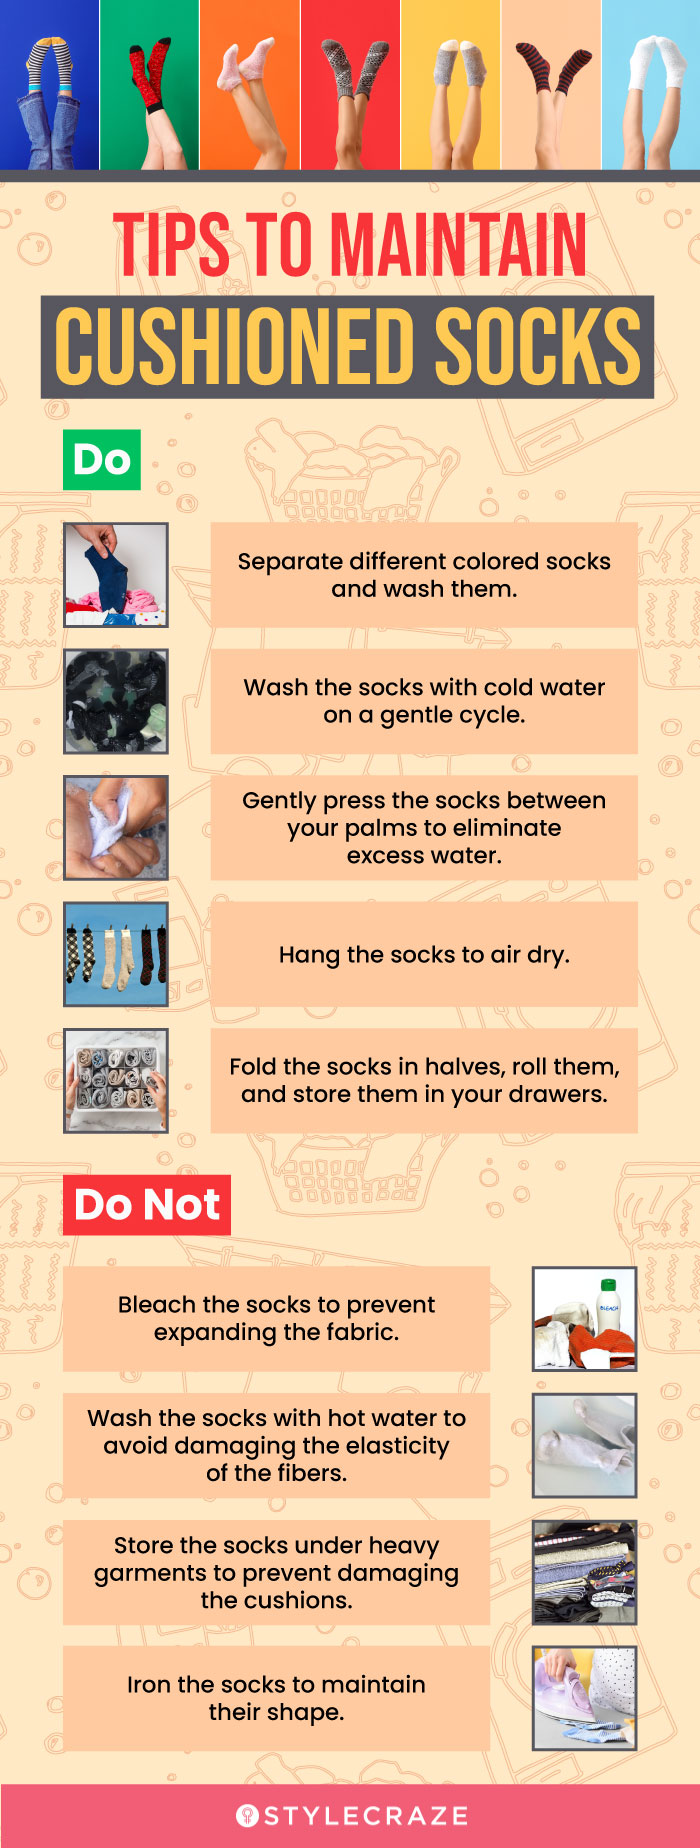 Tips To Maintain Cushioned Socks (infographic)